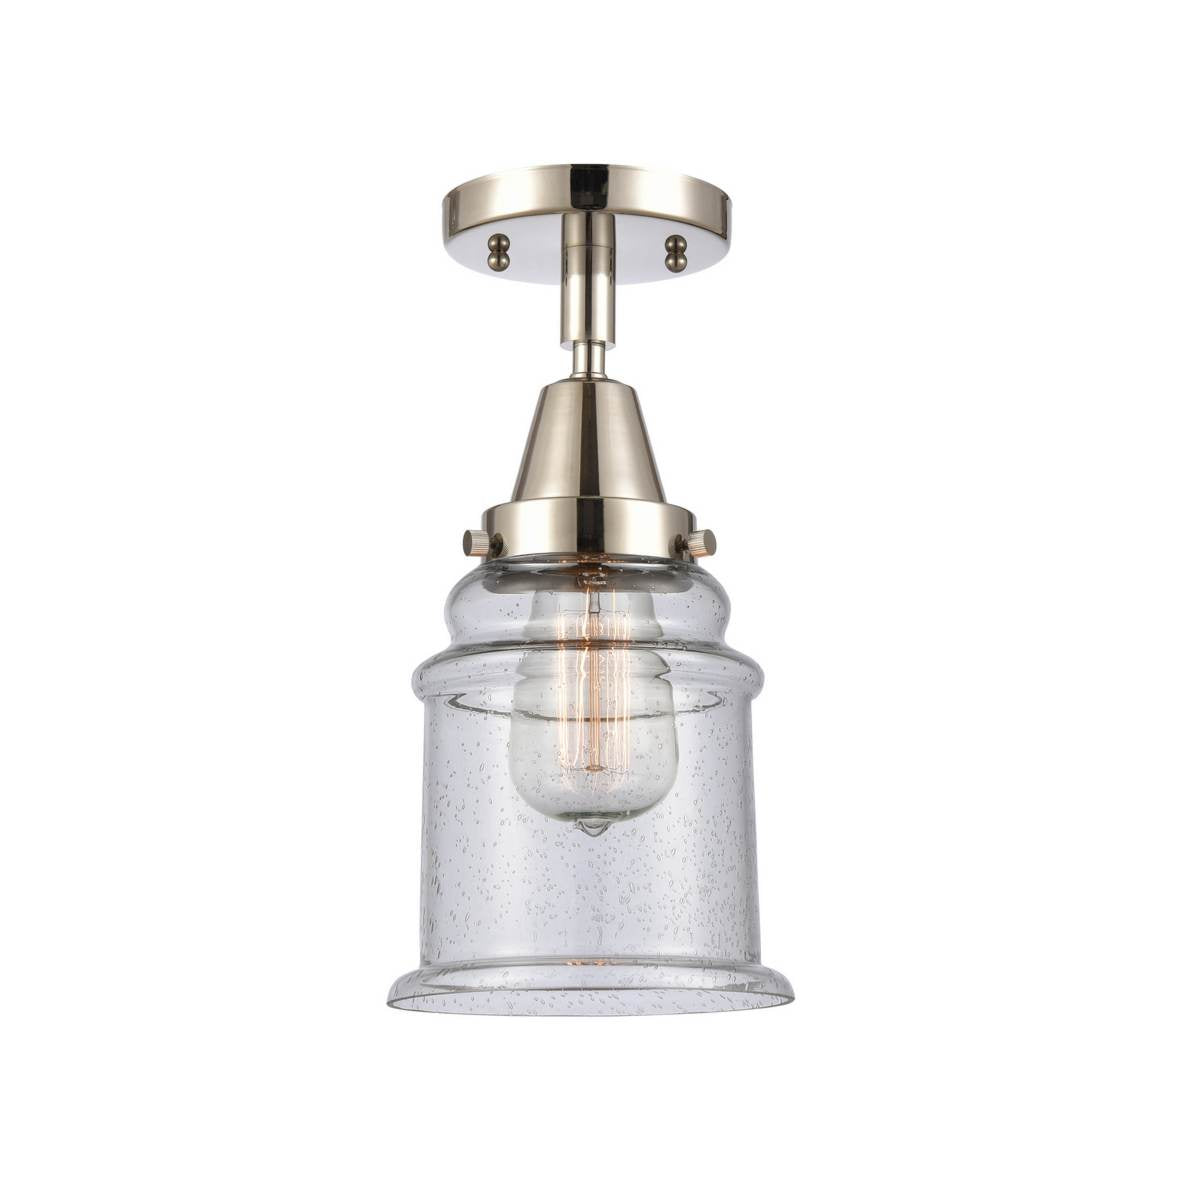 447-1C-PN-G184 1-Light 6" Polished Nickel Flush Mount - Seedy Canton Glass - LED Bulb - Dimmensions: 6 x 6 x 10 - Sloped Ceiling Compatible: No